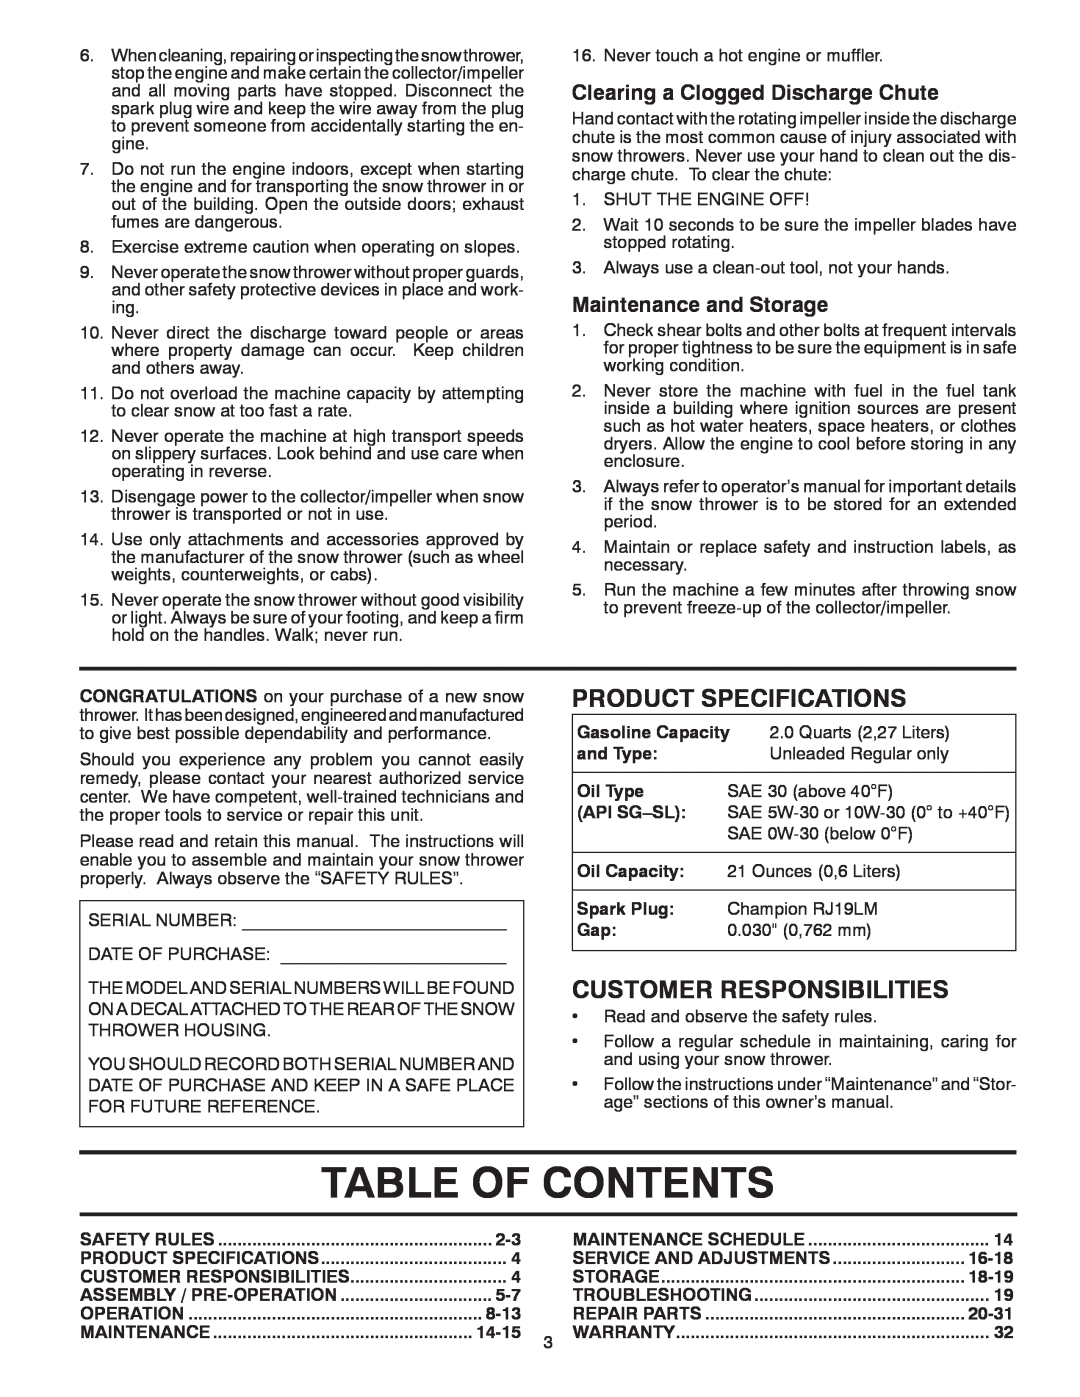 Poulan 414639 Table Of Contents, Product Specifications, Customer Responsibilities, Clearing a Clogged Discharge Chute 